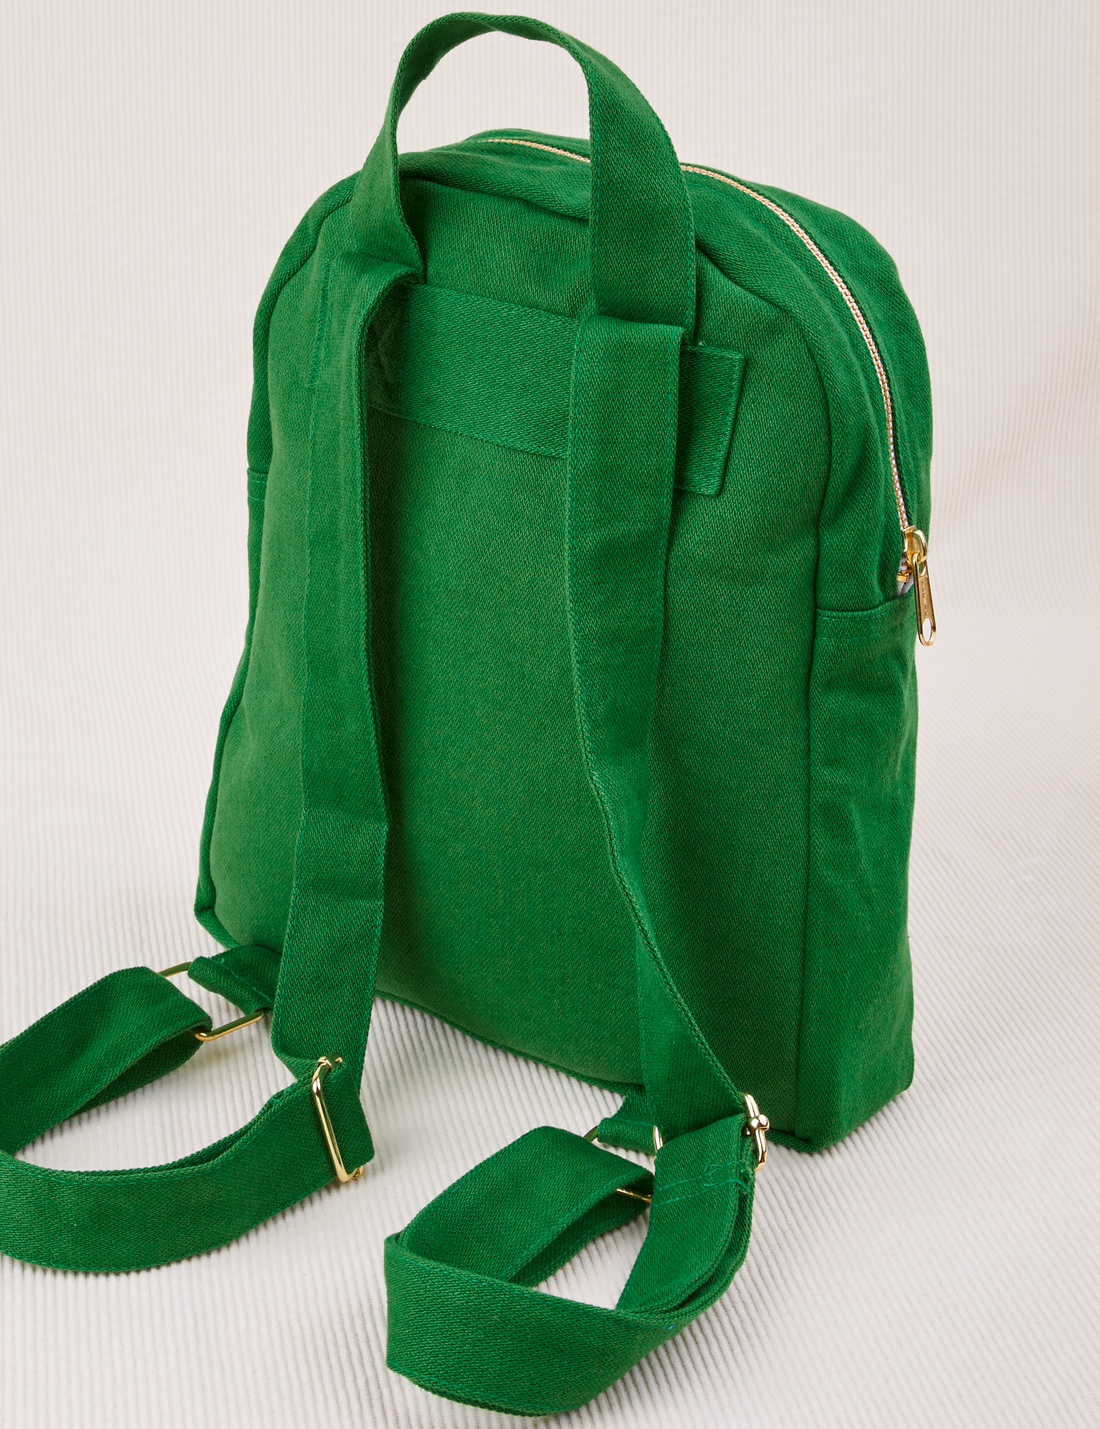 Mini Backpack in Forest Green back view